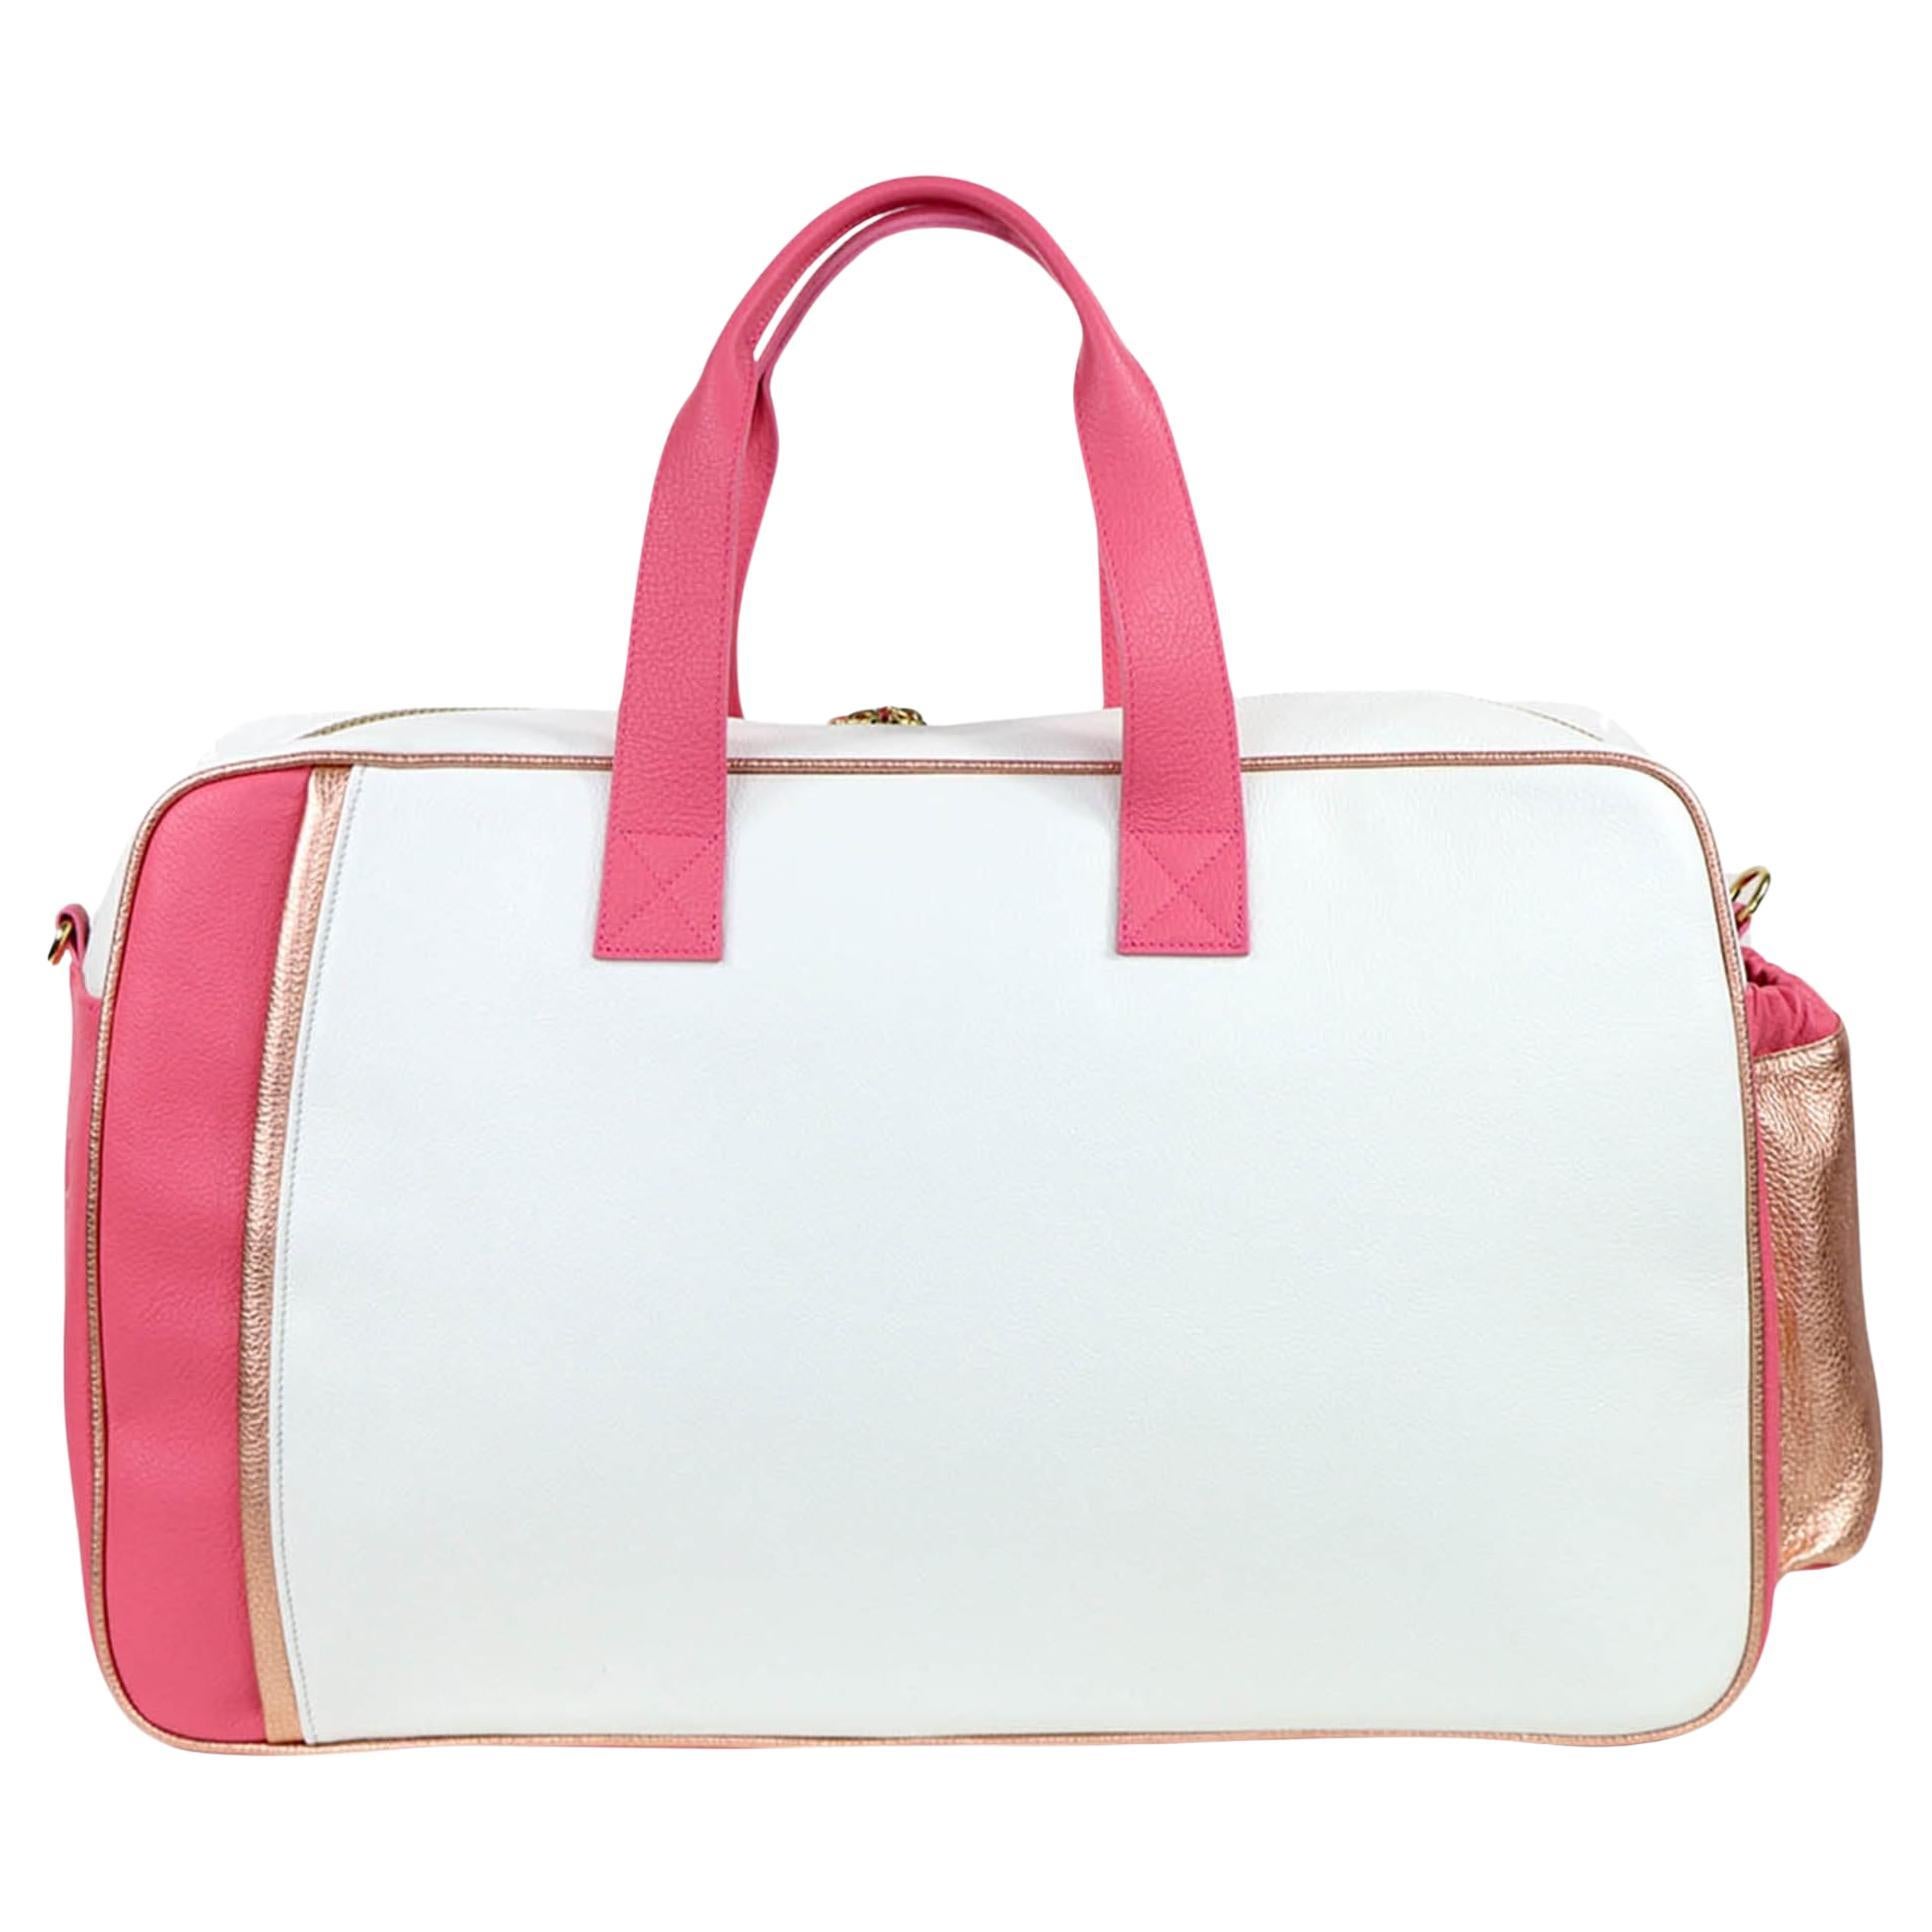 Sport White & Pink Duffle Bag For Sale